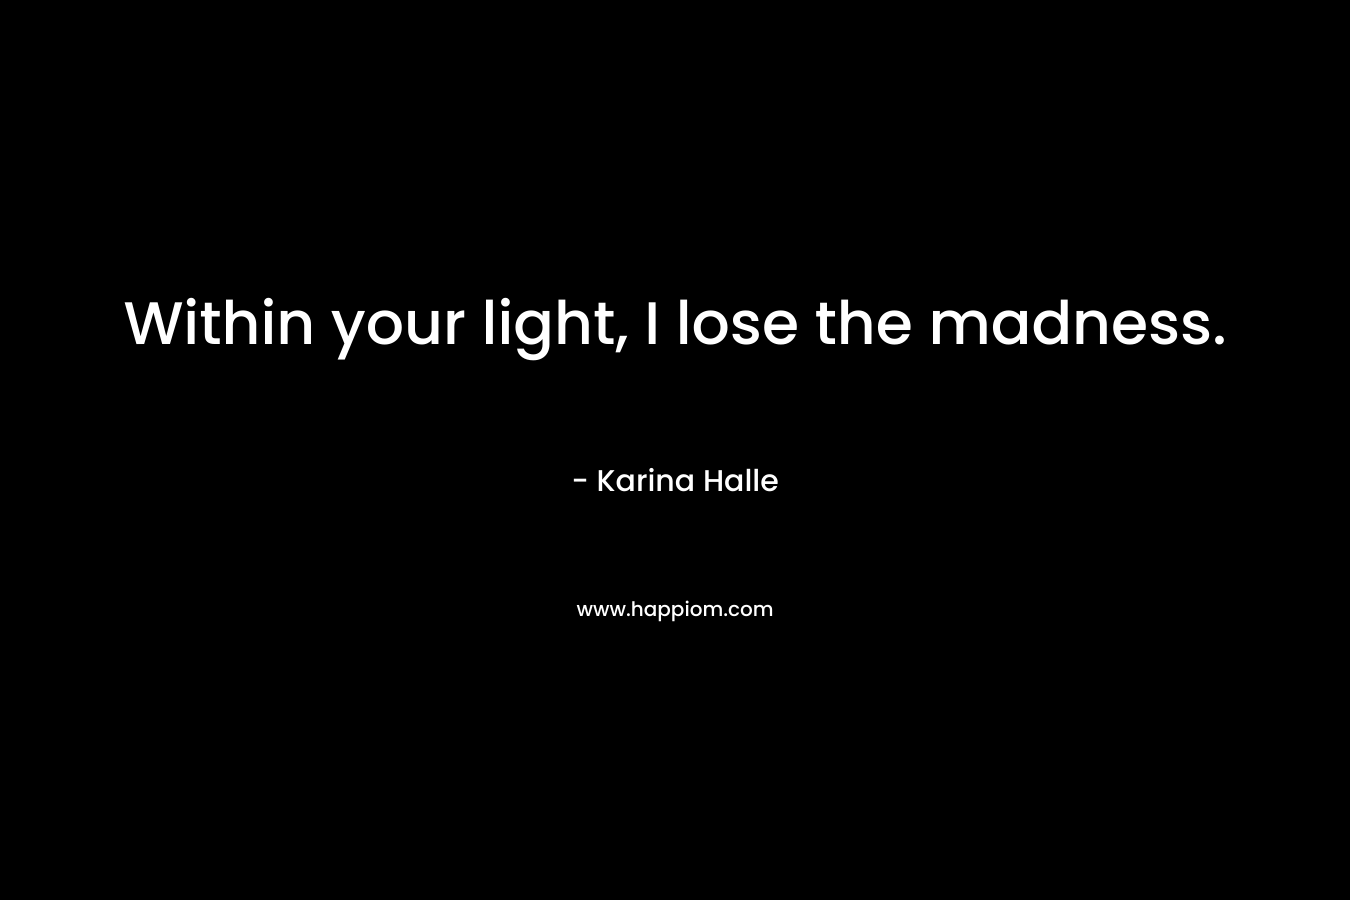 Within your light, I lose the madness.